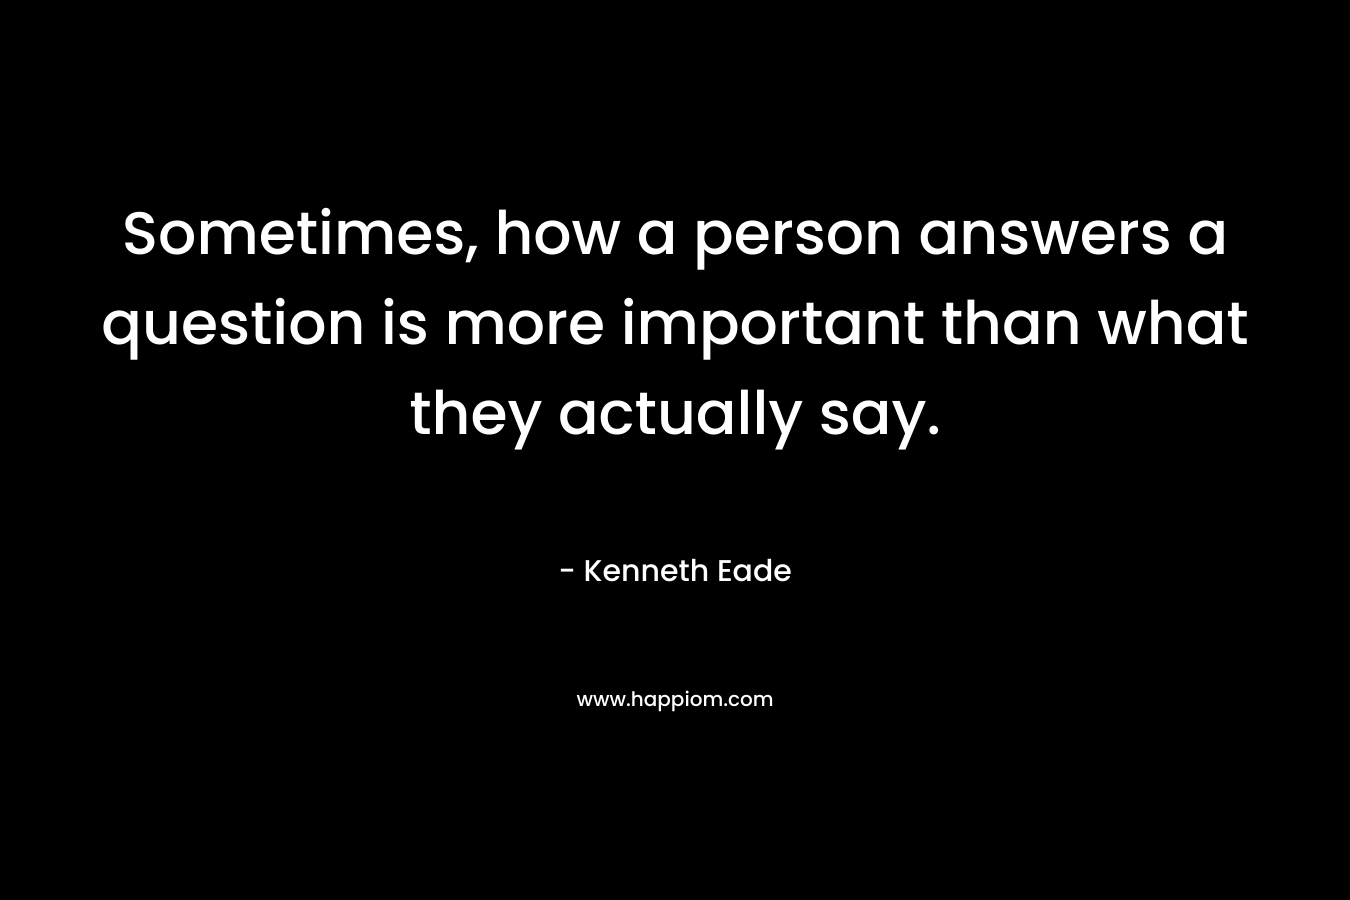 Sometimes, how a person answers a question is more important than what they actually say. – Kenneth Eade